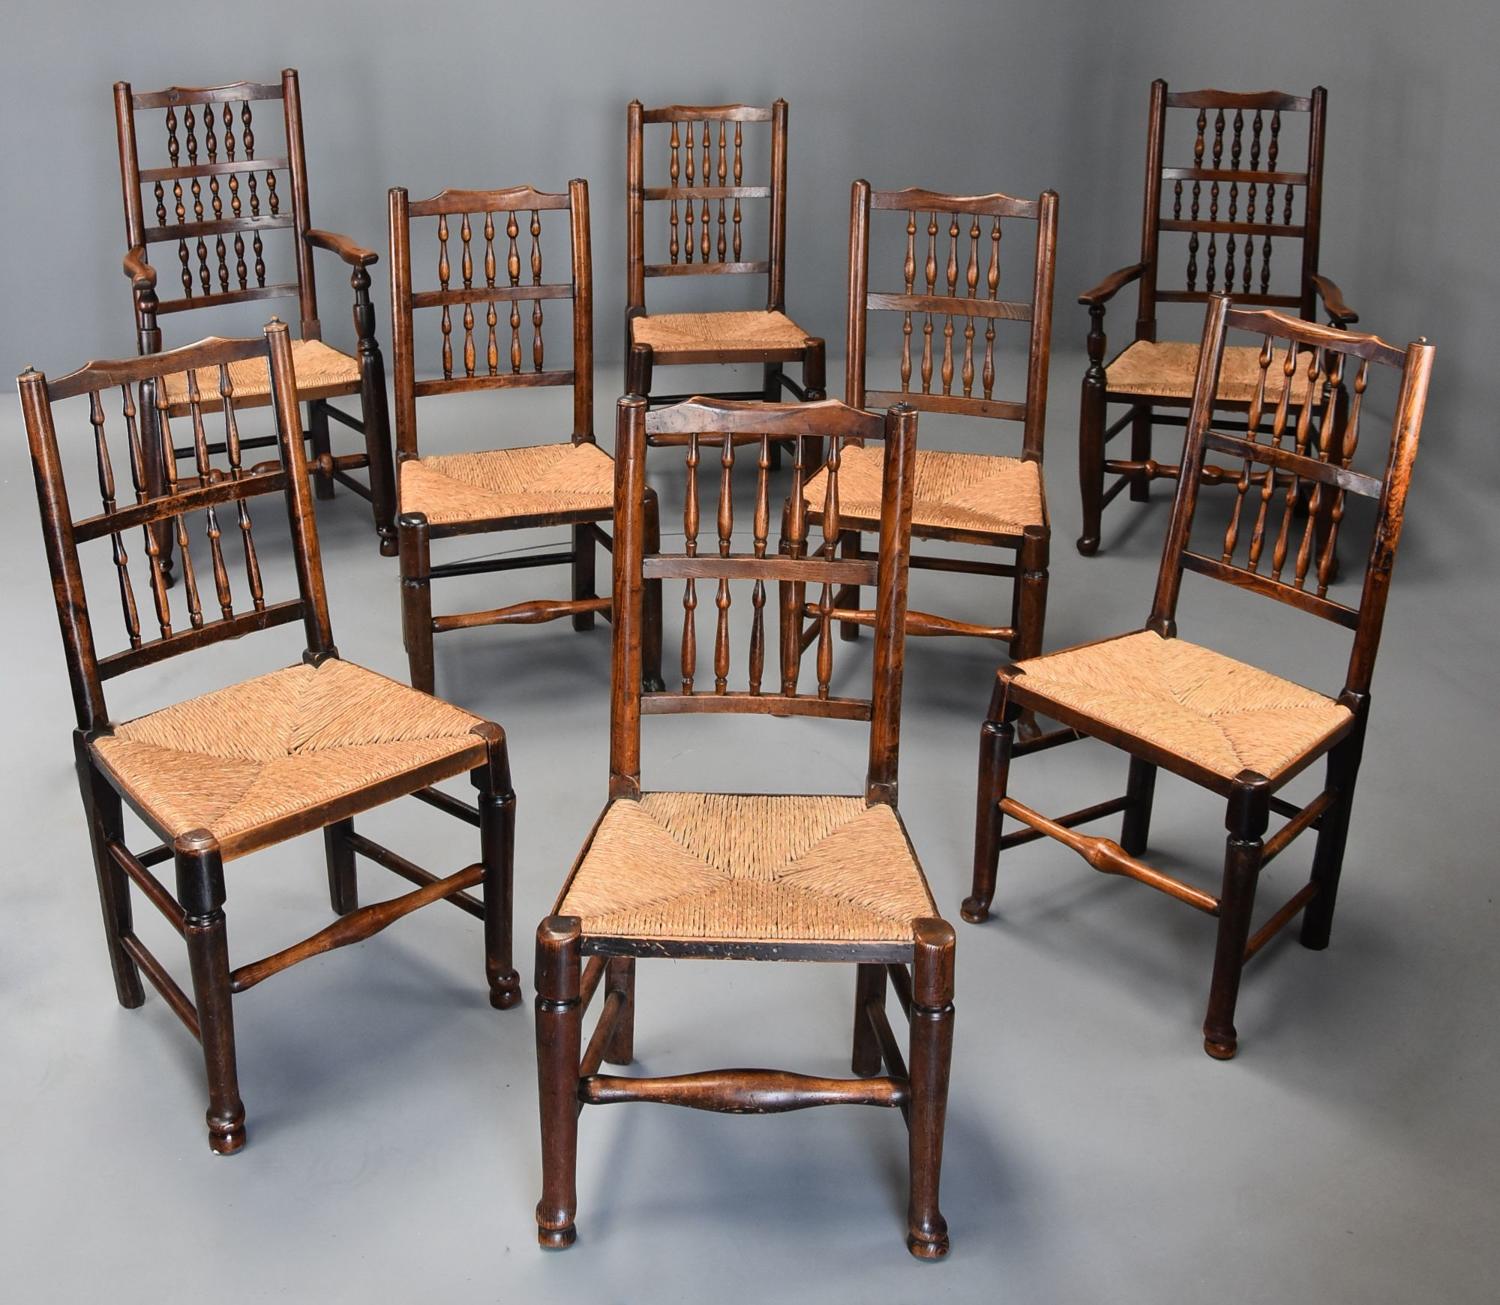 Matched set of eight 19thc ash spindle back chairs of superb patina